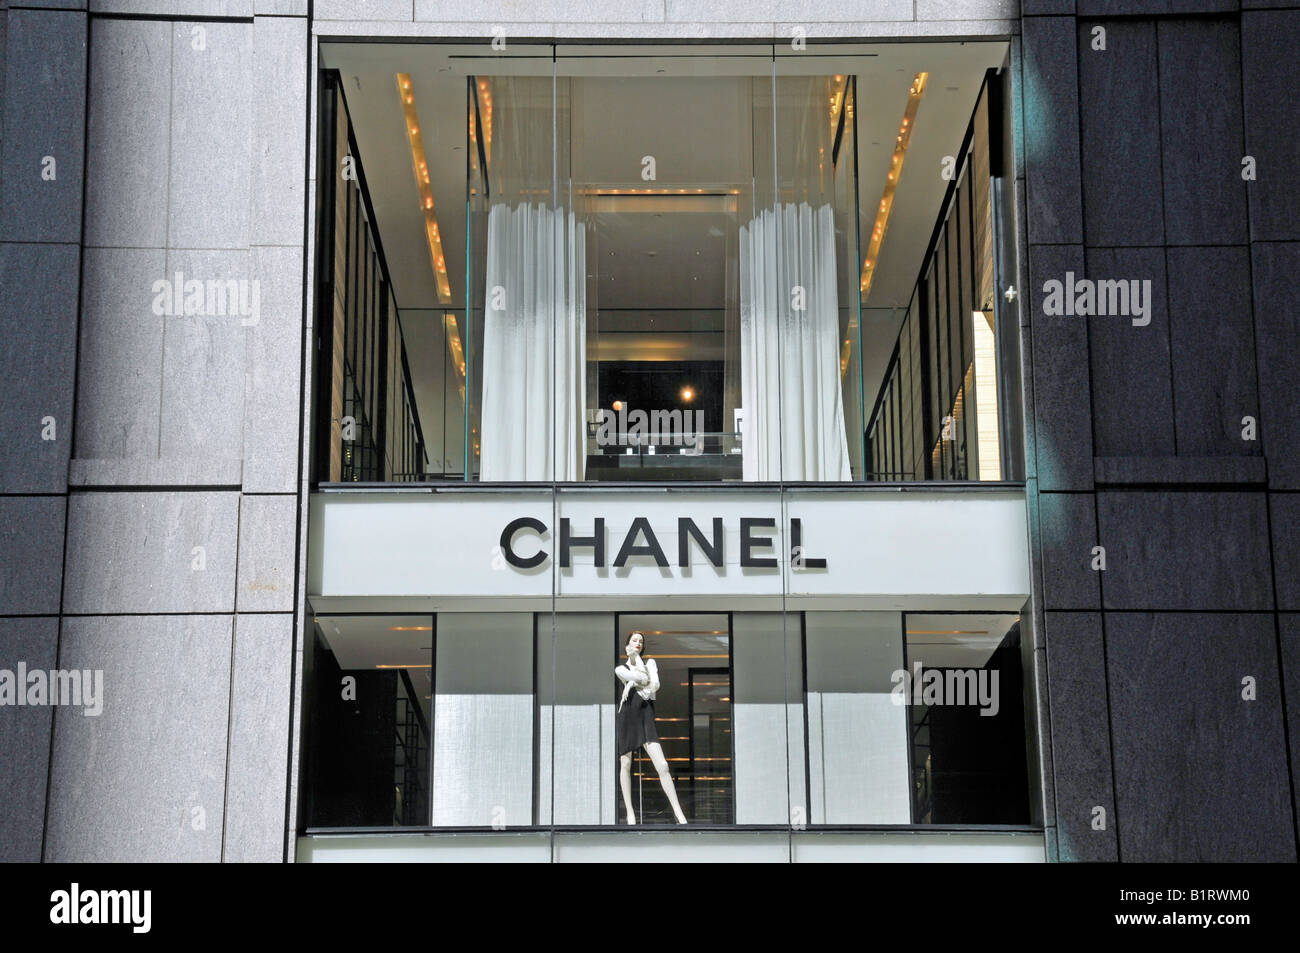 14,000 Square Feet, 5 Floors, 35 Artworks, and 1 Debut Fragrance: Chanel's  New Flagship by the Numbers